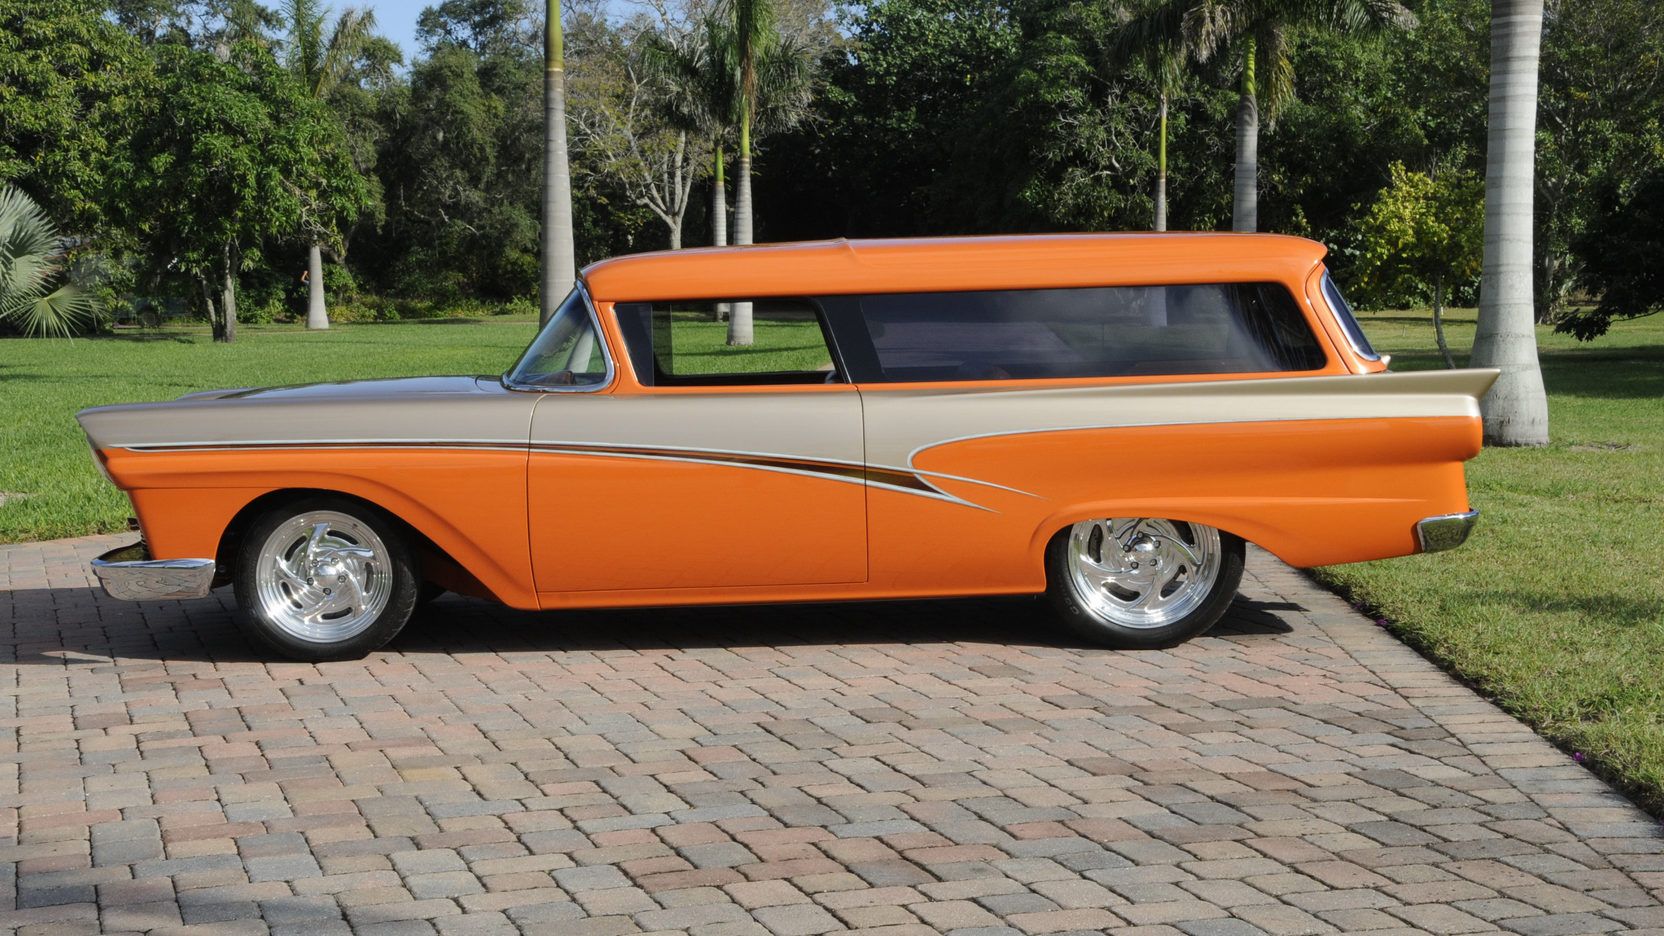 A parked 1957 Ford Custom Wagon on display